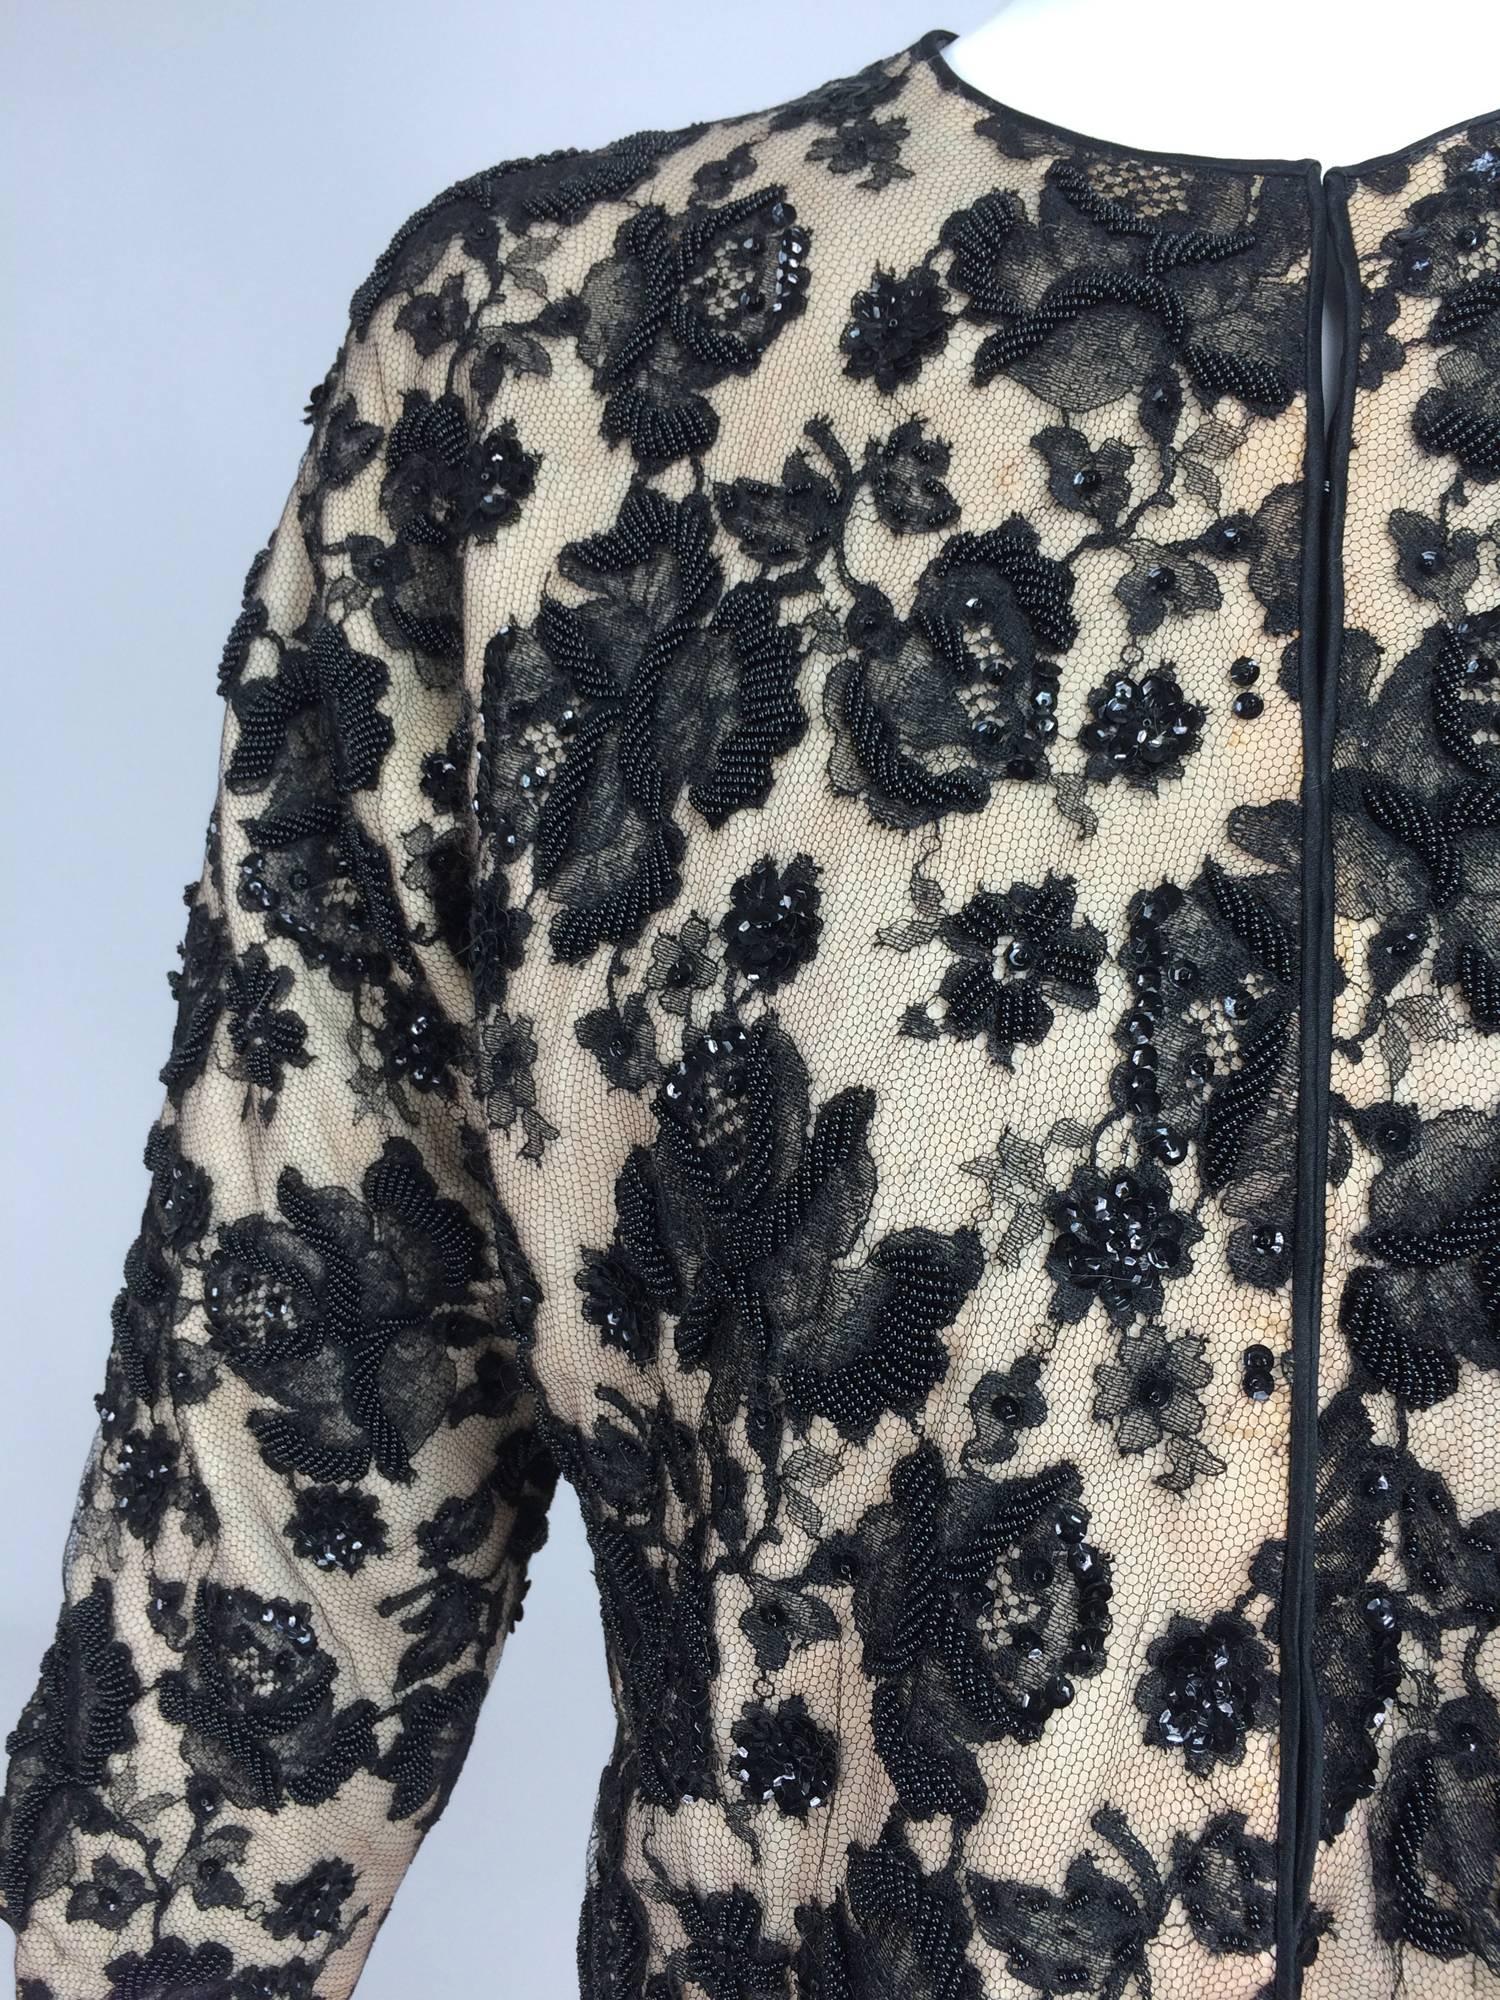 Beaded black lace & cashmere satin trimmed cardigan sweater 1950s...A beautiful sweater from the late 1950s...The cream cashmere sweater is overlaid with beaded black lace, the facings are finished with narrow bands of black satin...The sweater is